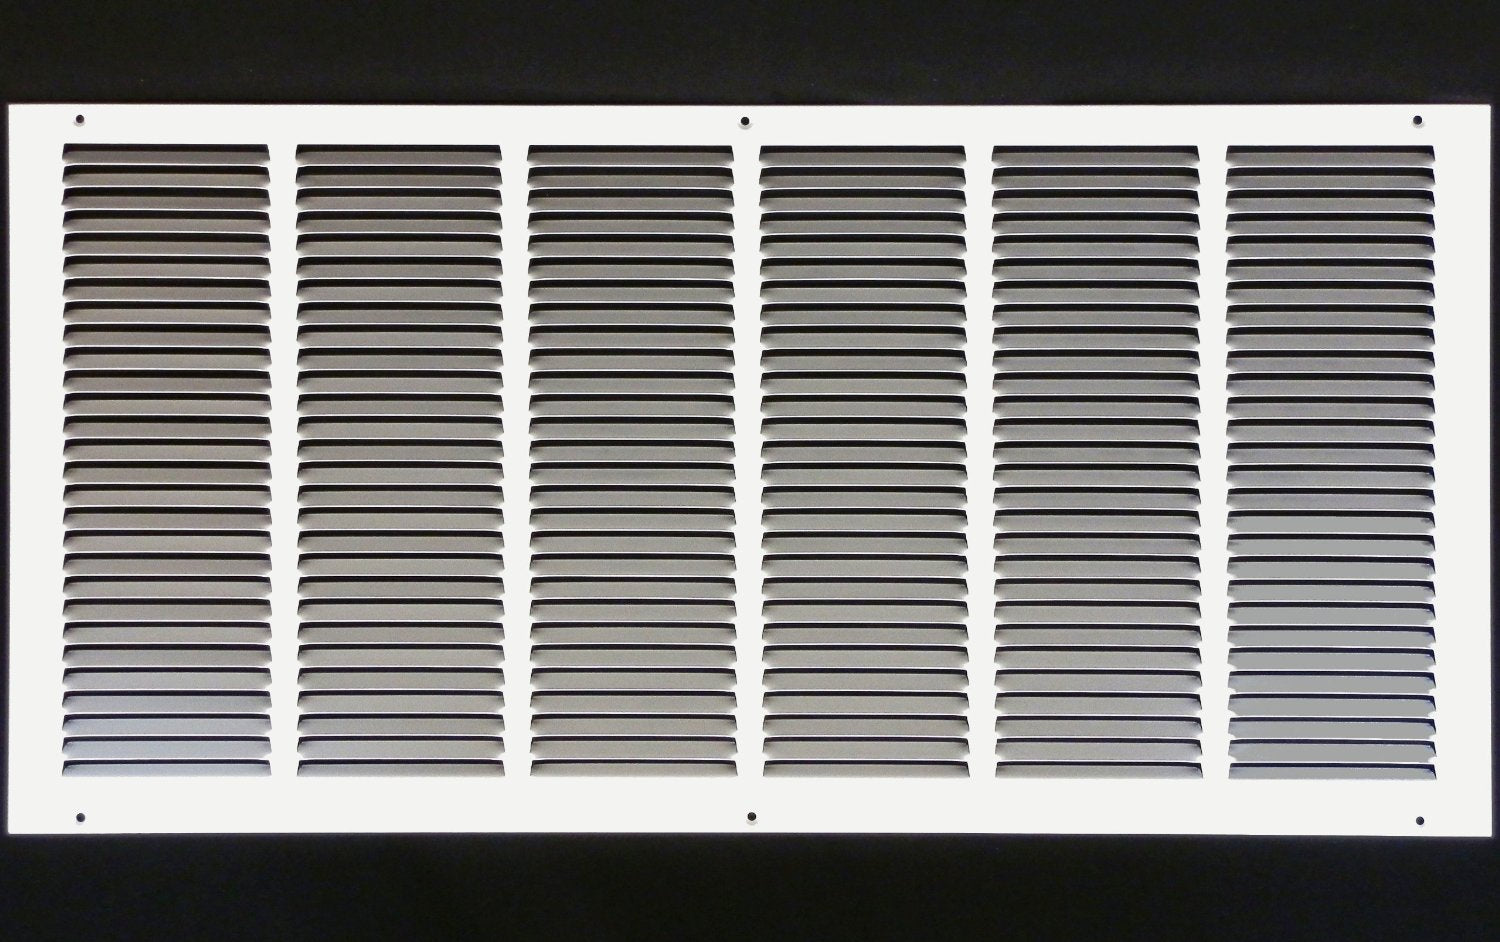 30" X 14" Air Vent Return Grilles - Sidewall and Ceiling - Steel